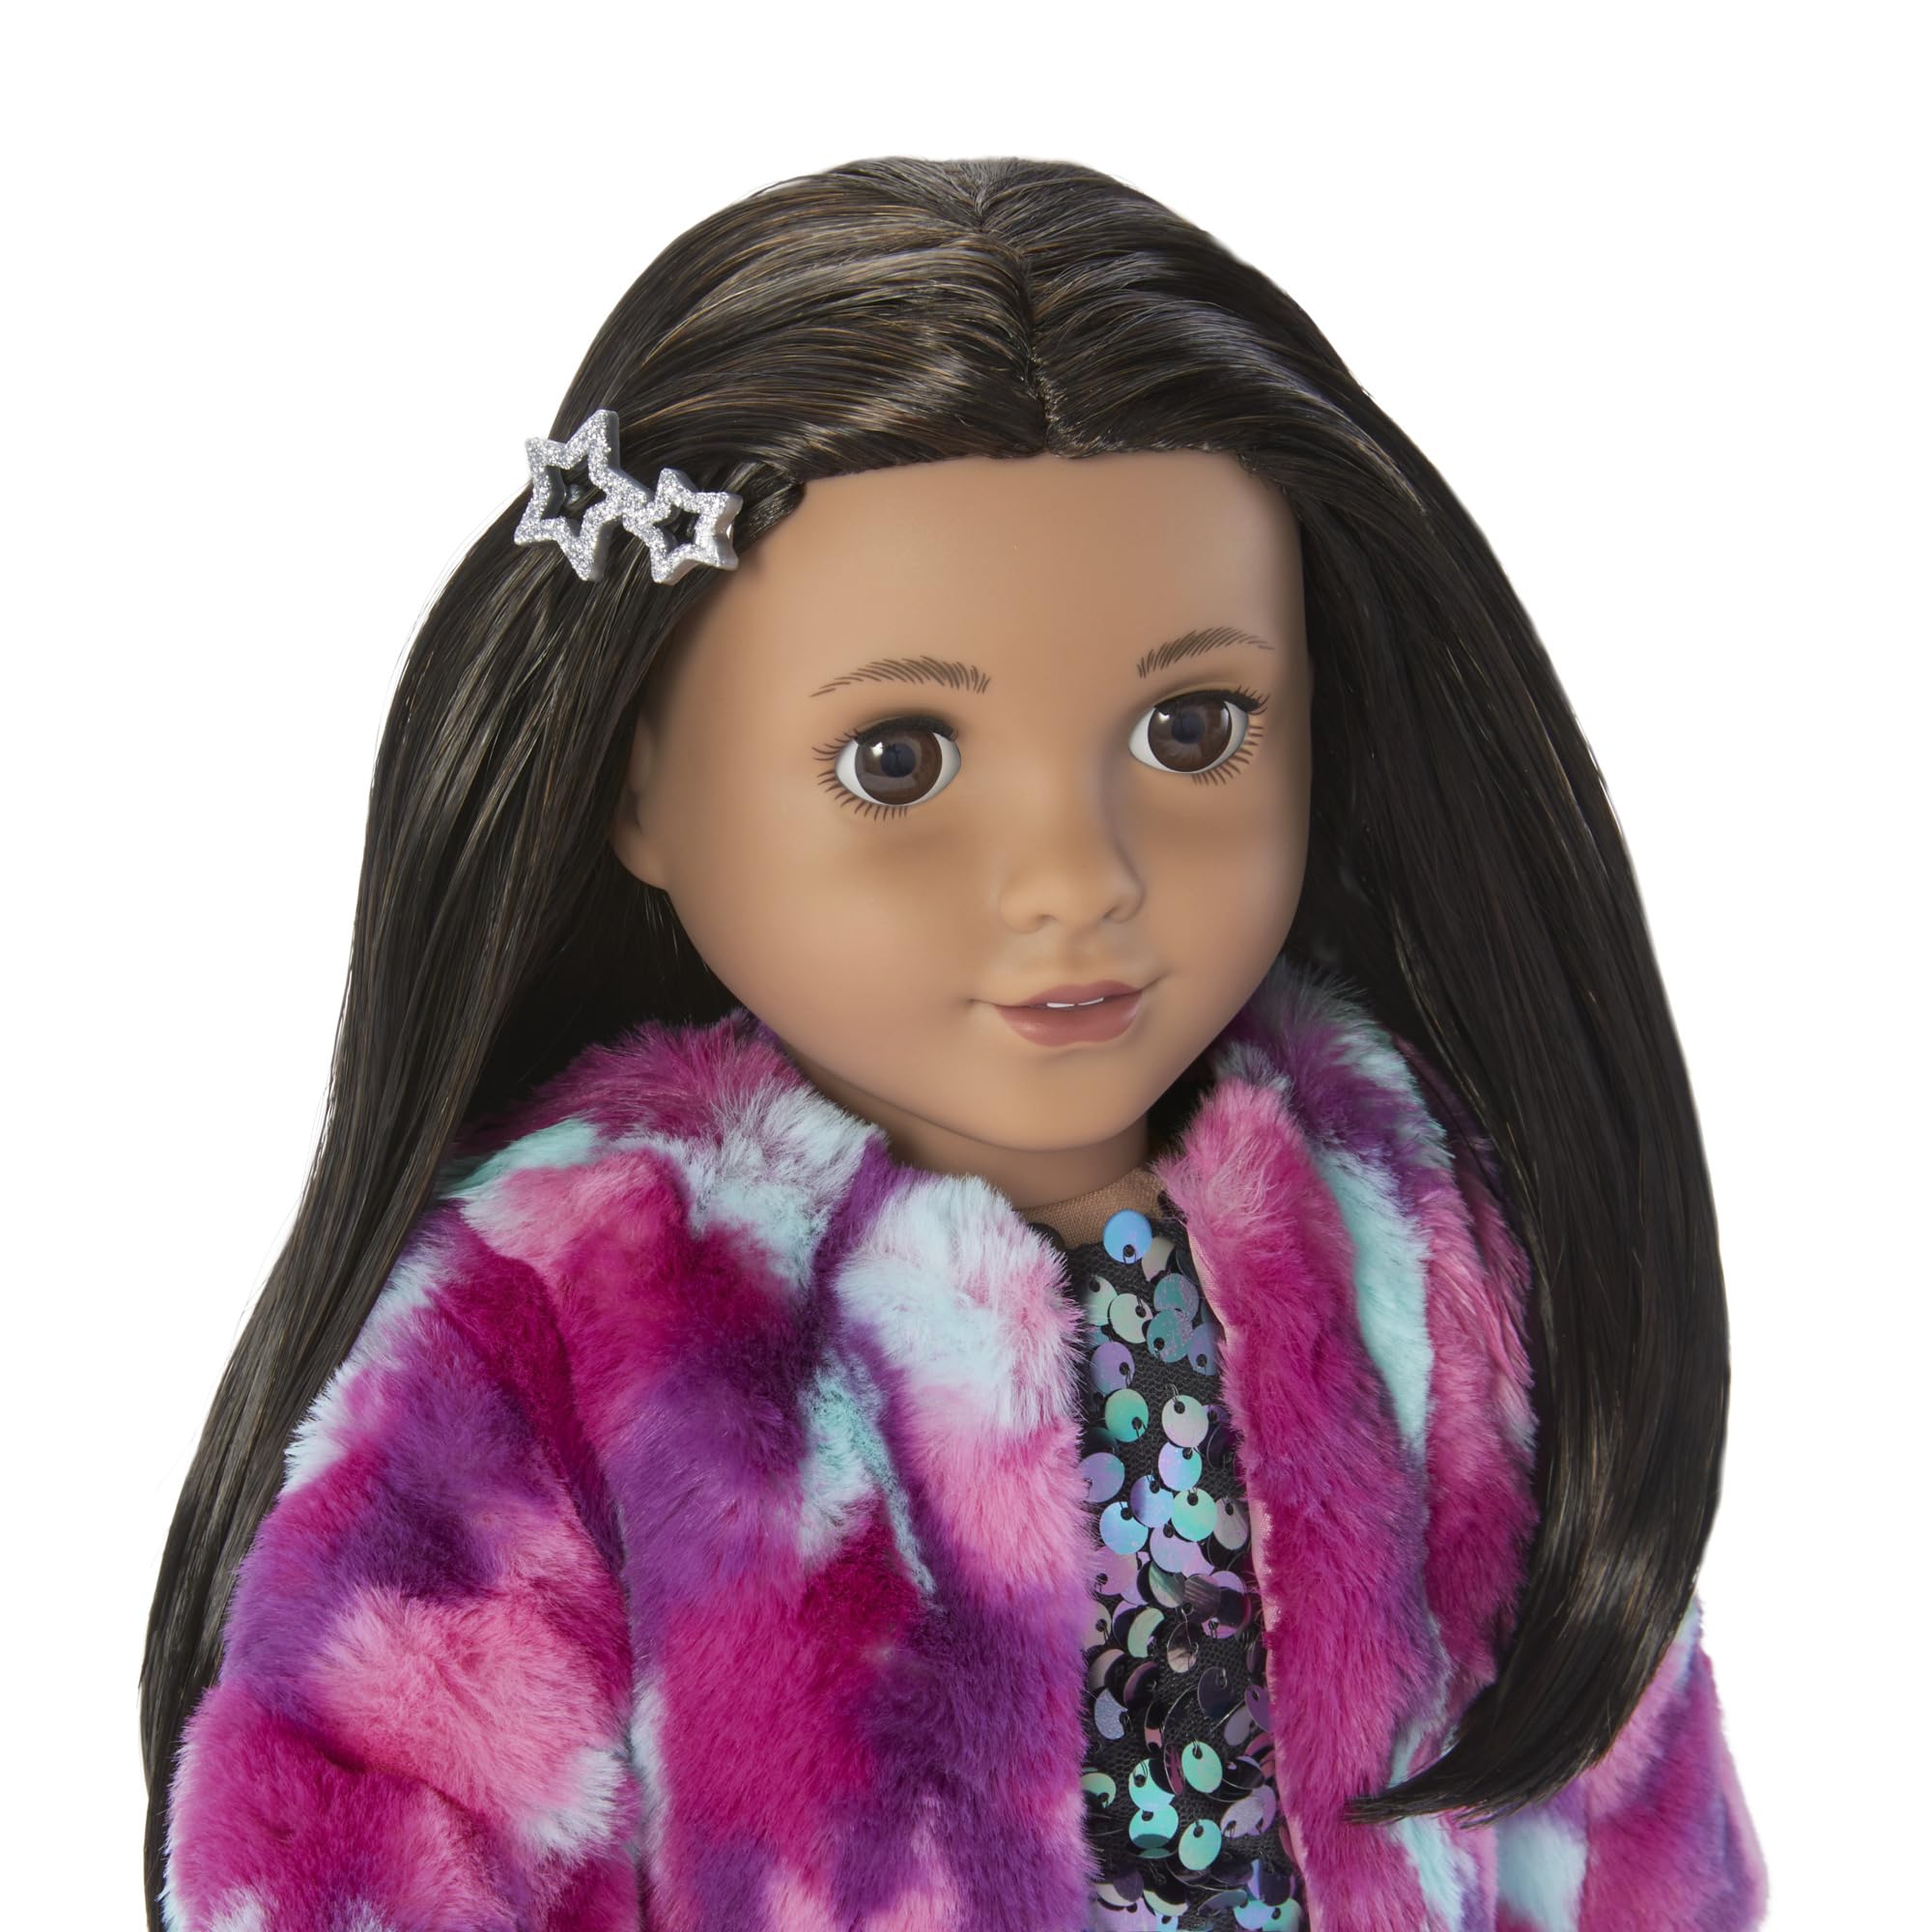 American Girl Girl of The Year Kavi Sharma 18-inch Doll Performance Outfit Featuring 6 Pieces for Ages 8+